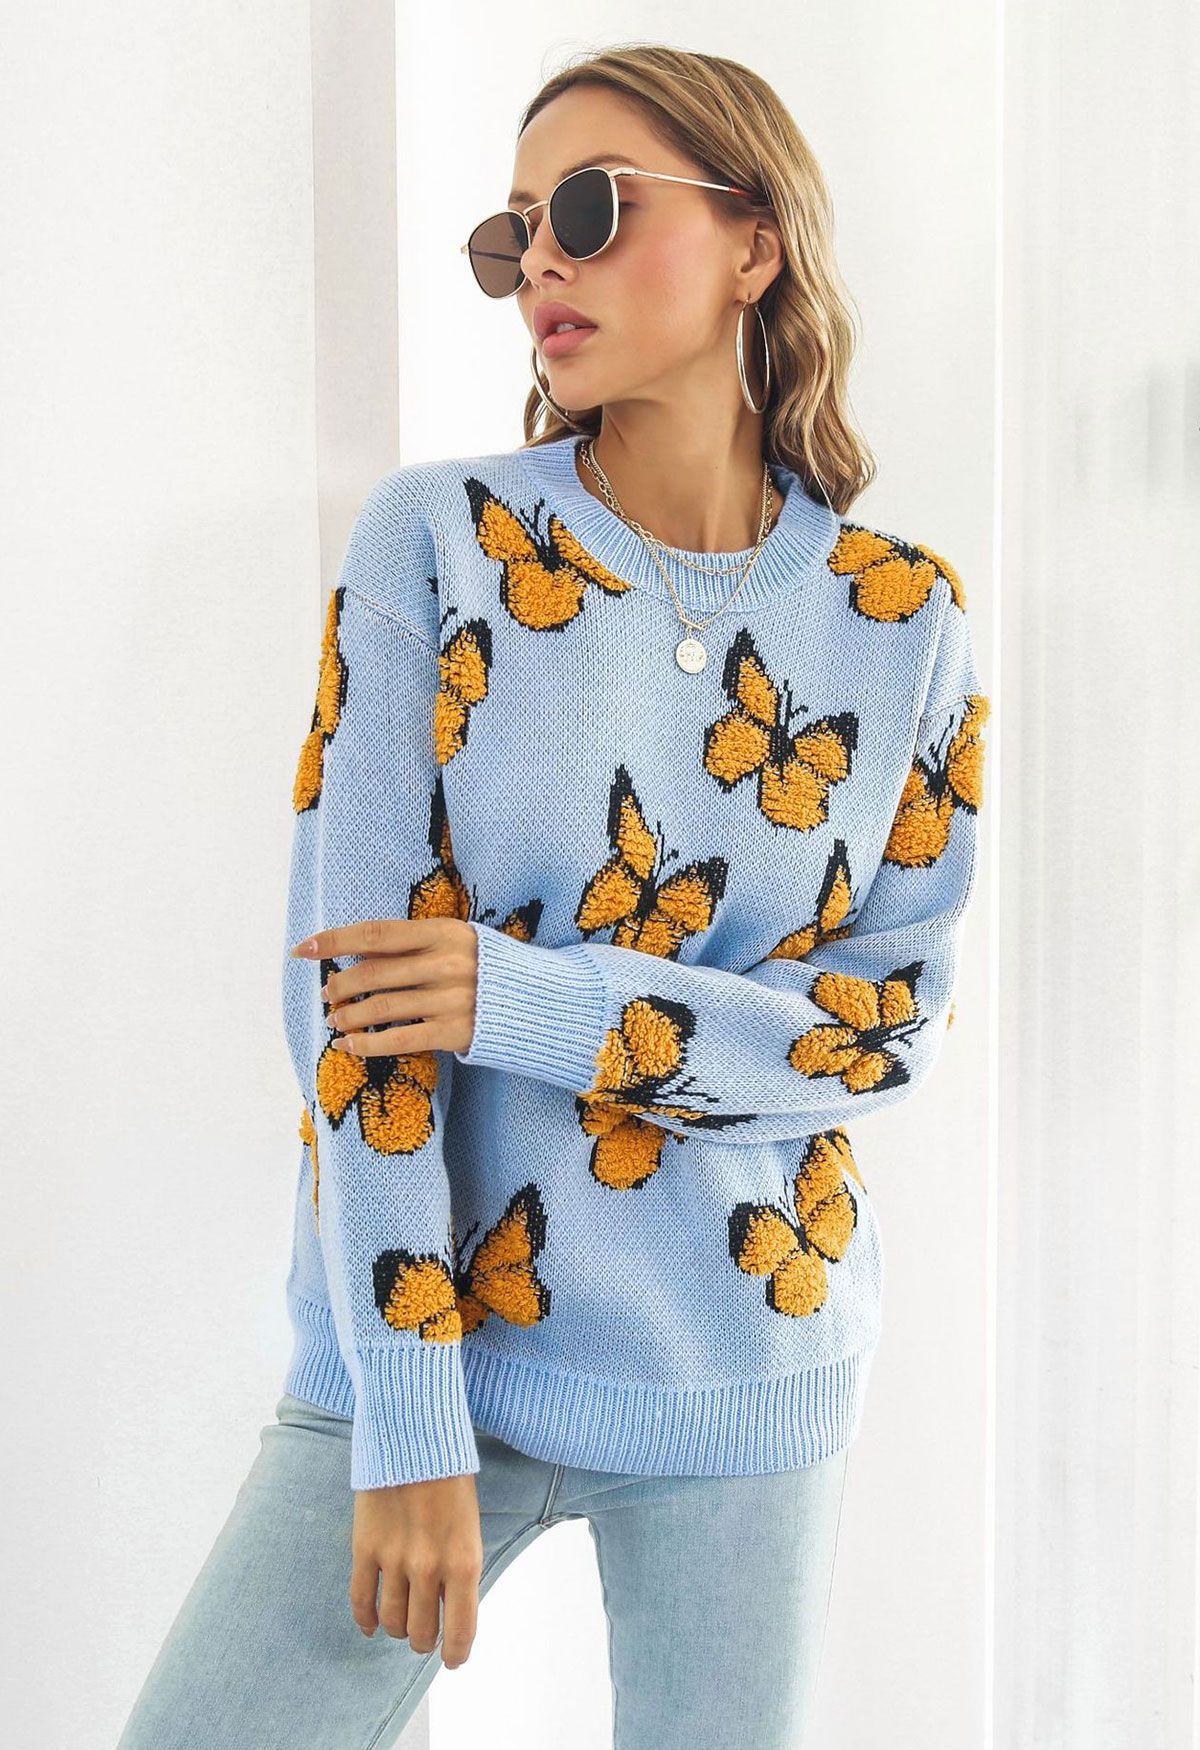 Balletic Butterfly Ribbed Knit Sweater in Blue